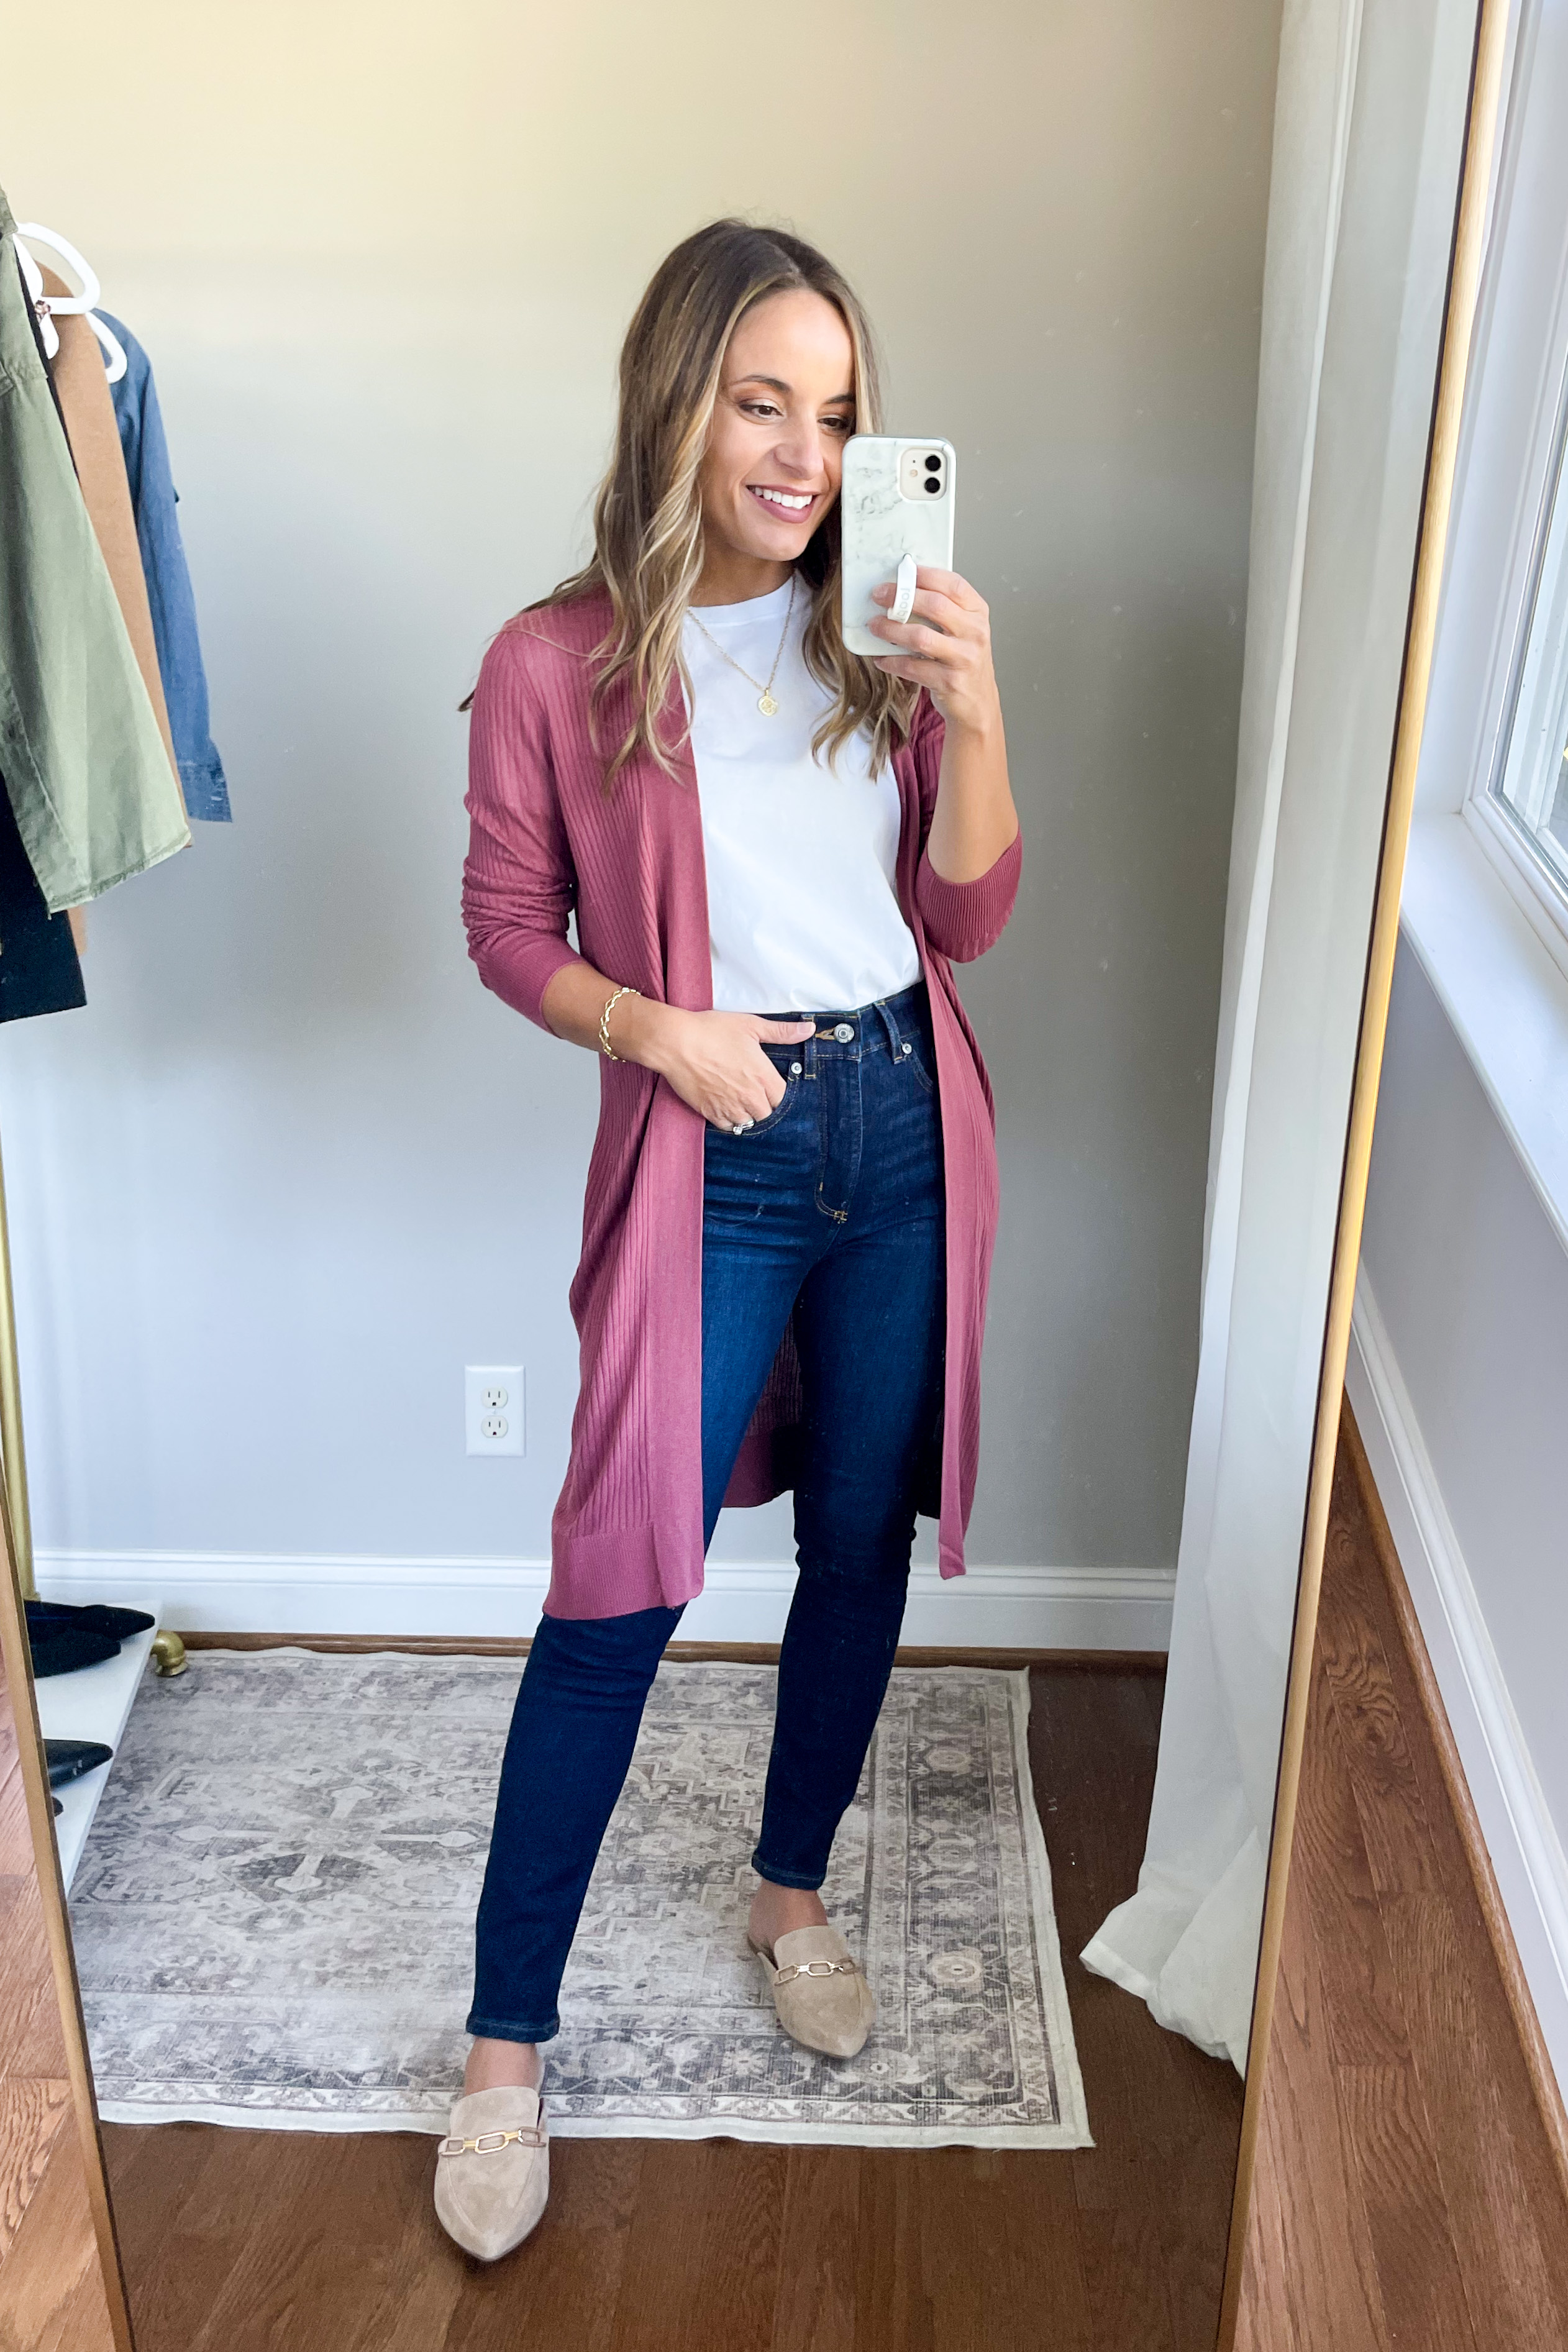 Colorful Outfits for Work - Pumps & Push Ups